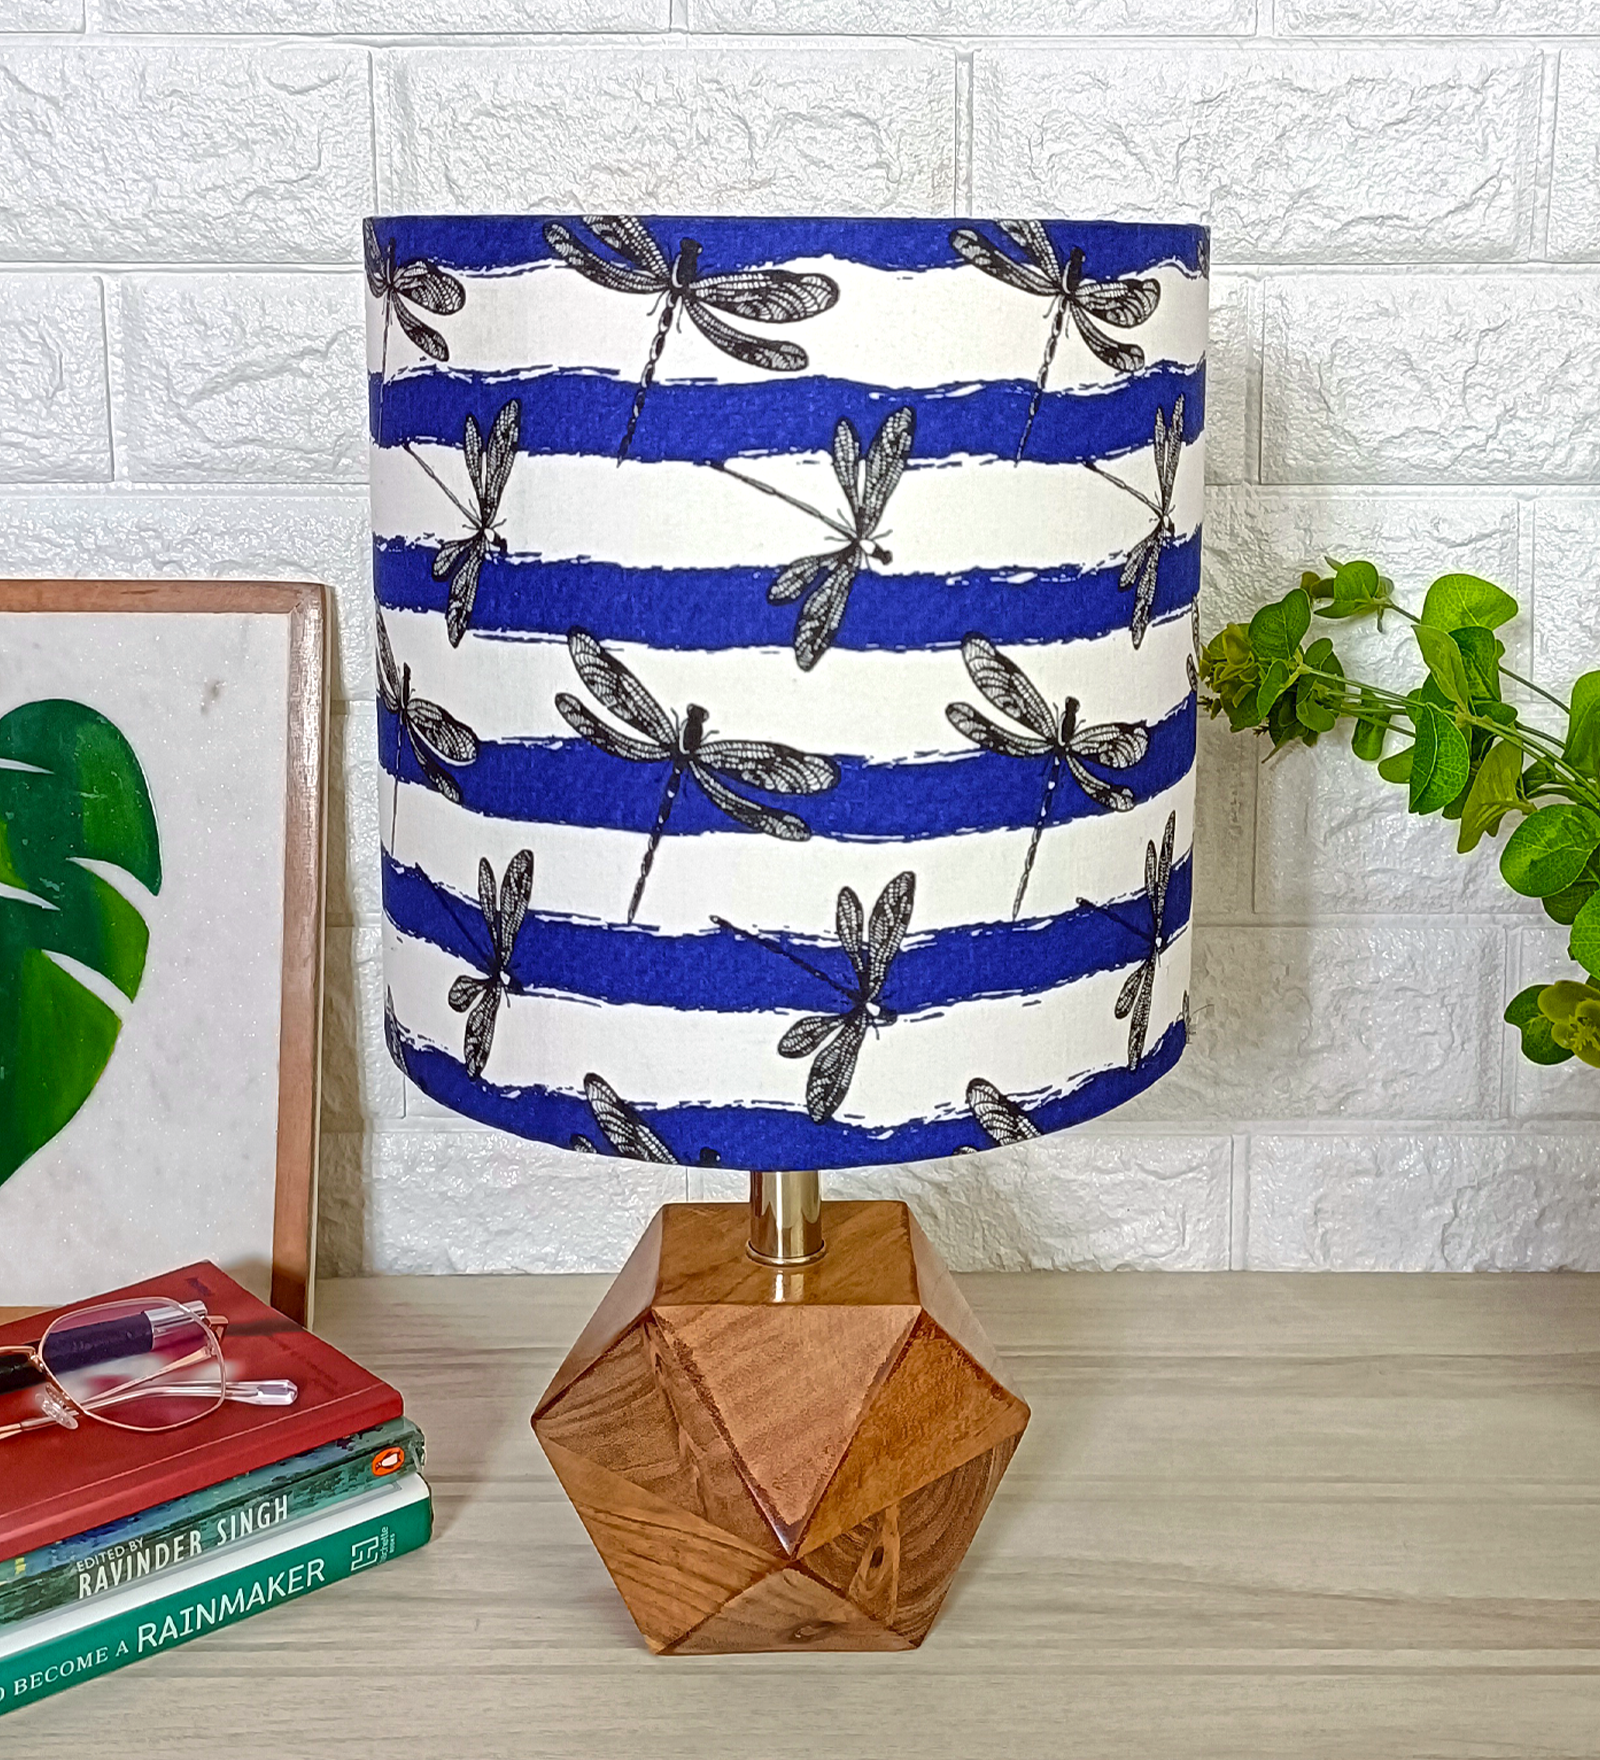 Artistic Wooden Table Lamp